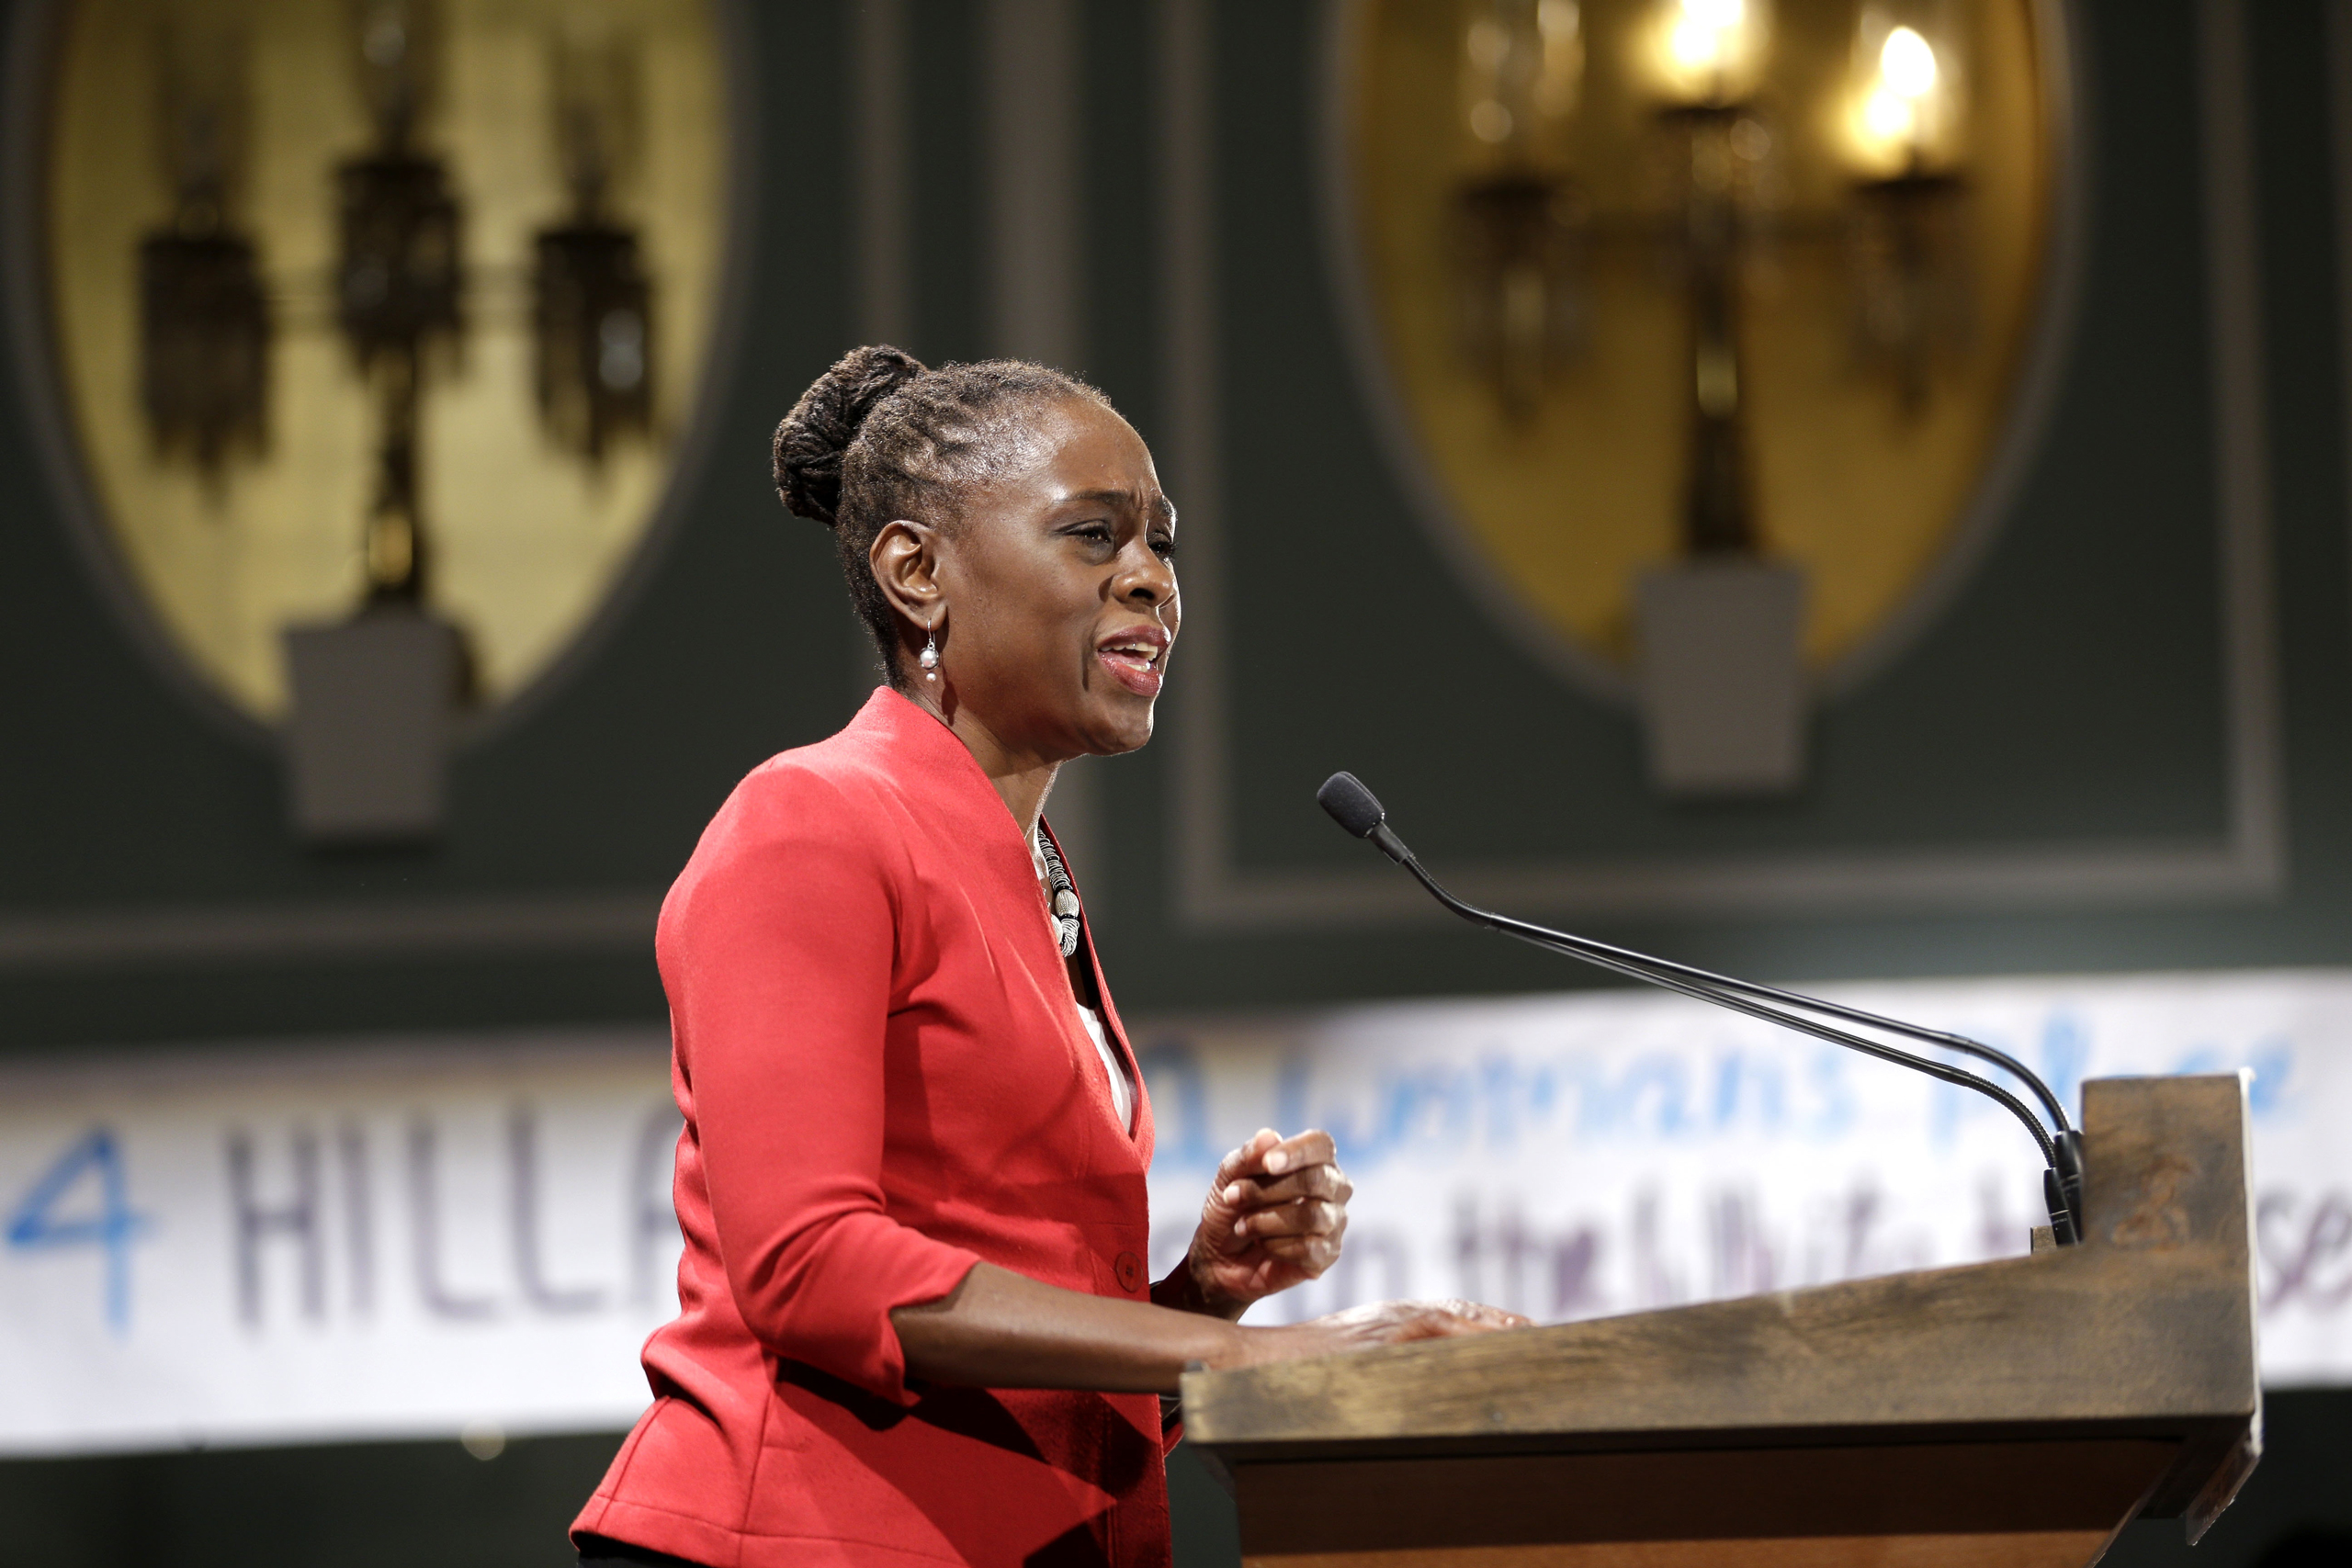 First lady of New York City Chirlane McCray speaks during a Women for Hillary event in New York on April 18, 2016. (Seth Wenig—AP)